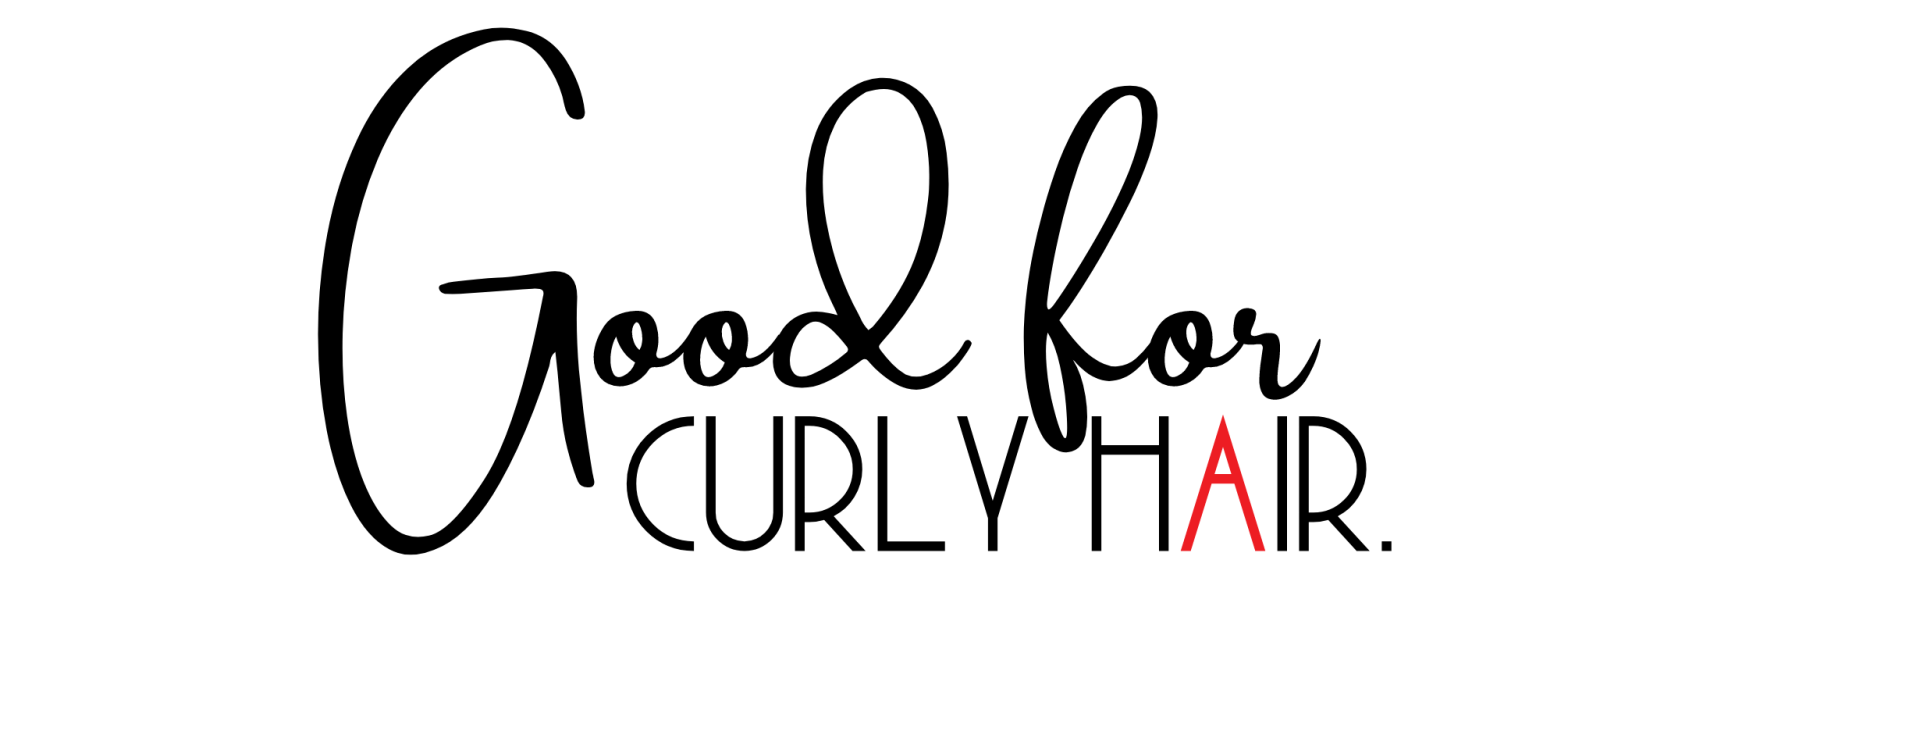 good for curly hair